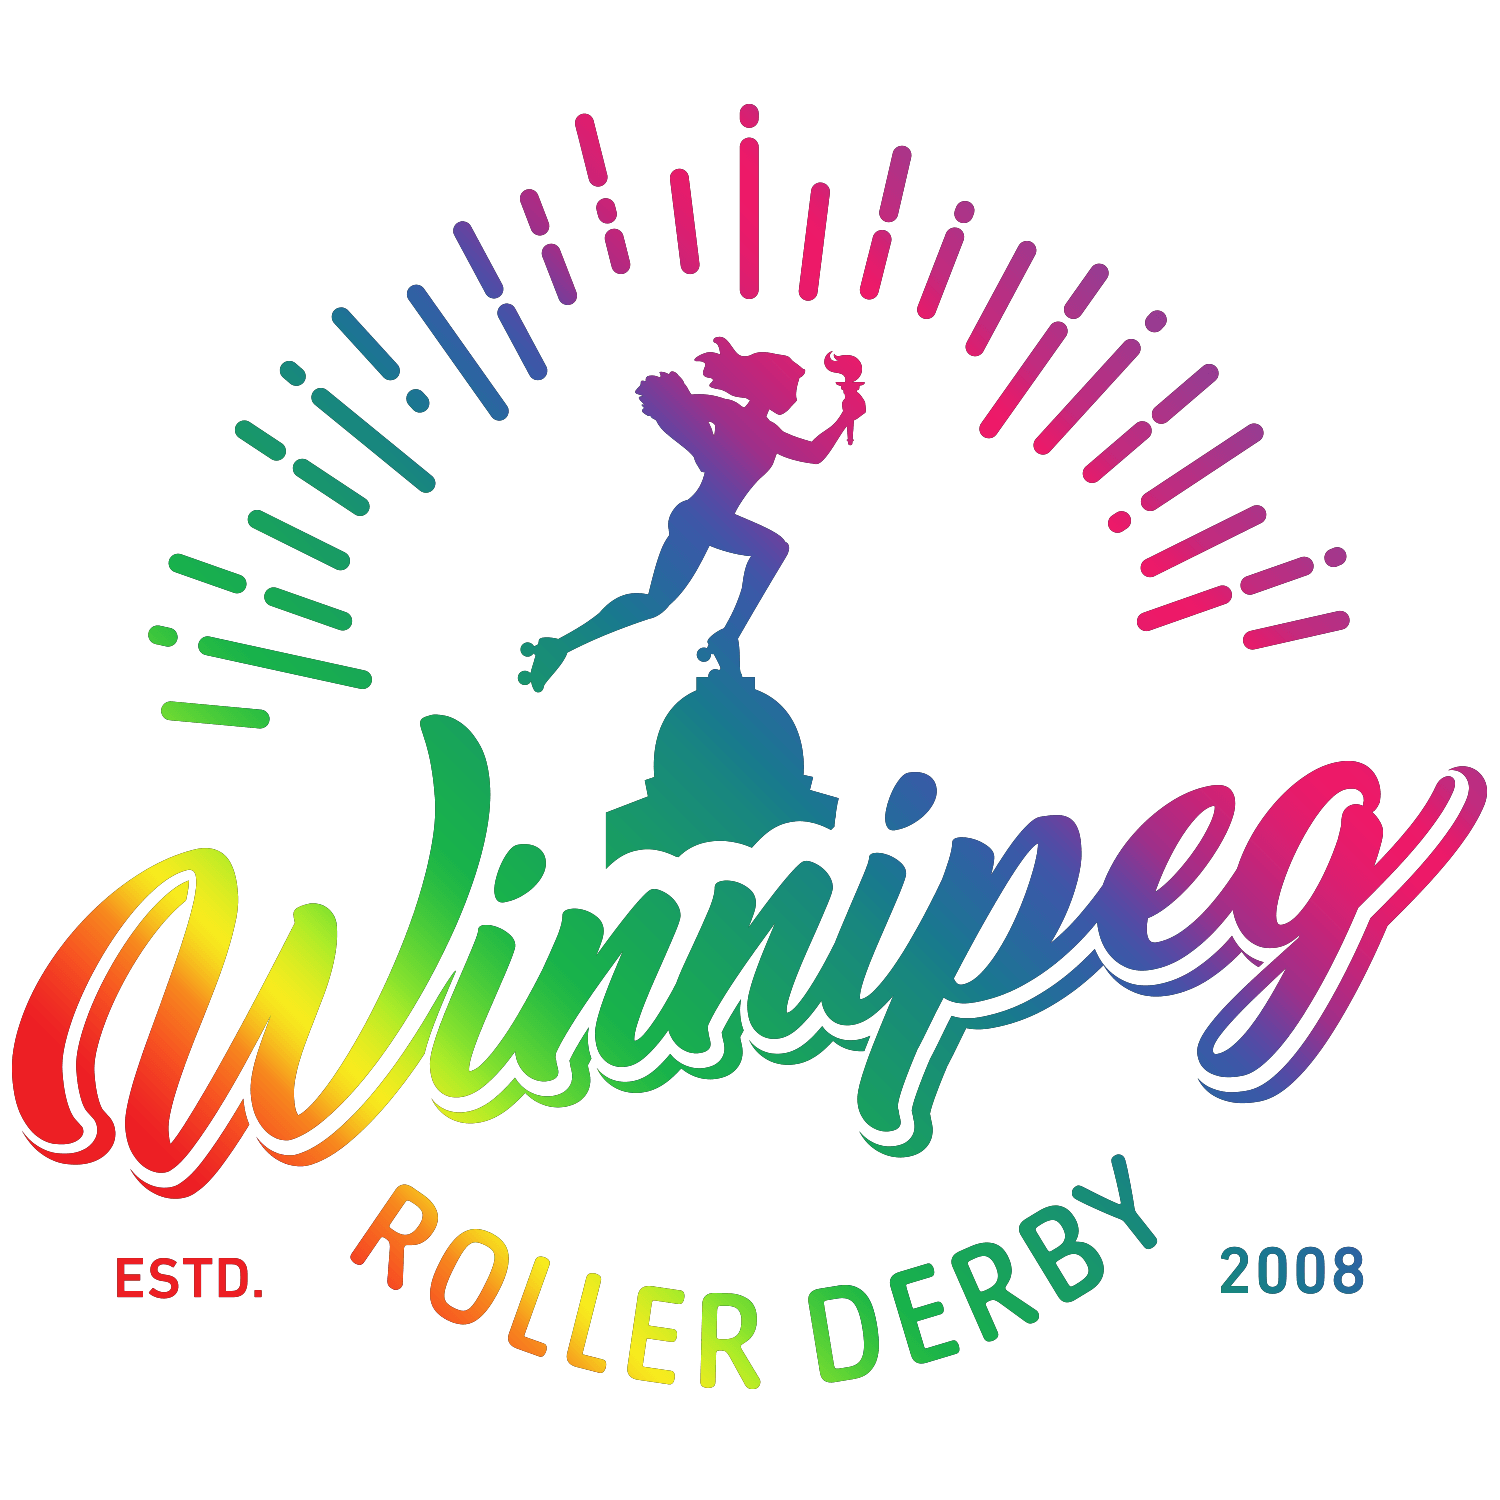 Rainbow Person Logo - Winnipeg Roller Derby League. Apply for the 2018 WRDL Pride